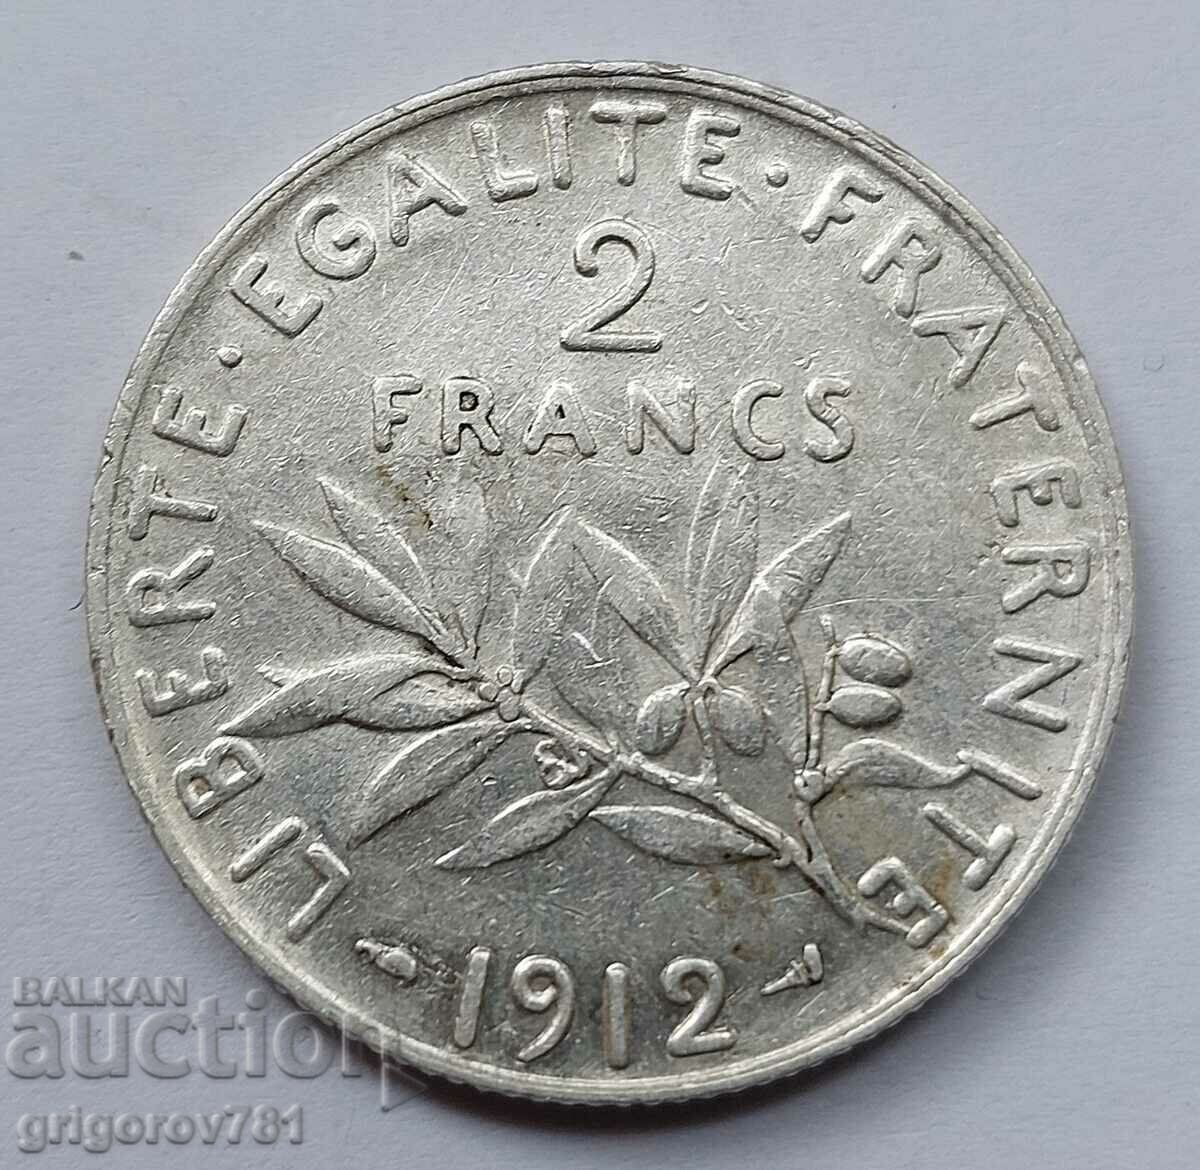 2 Francs Silver France 1912 - Silver Coin #146